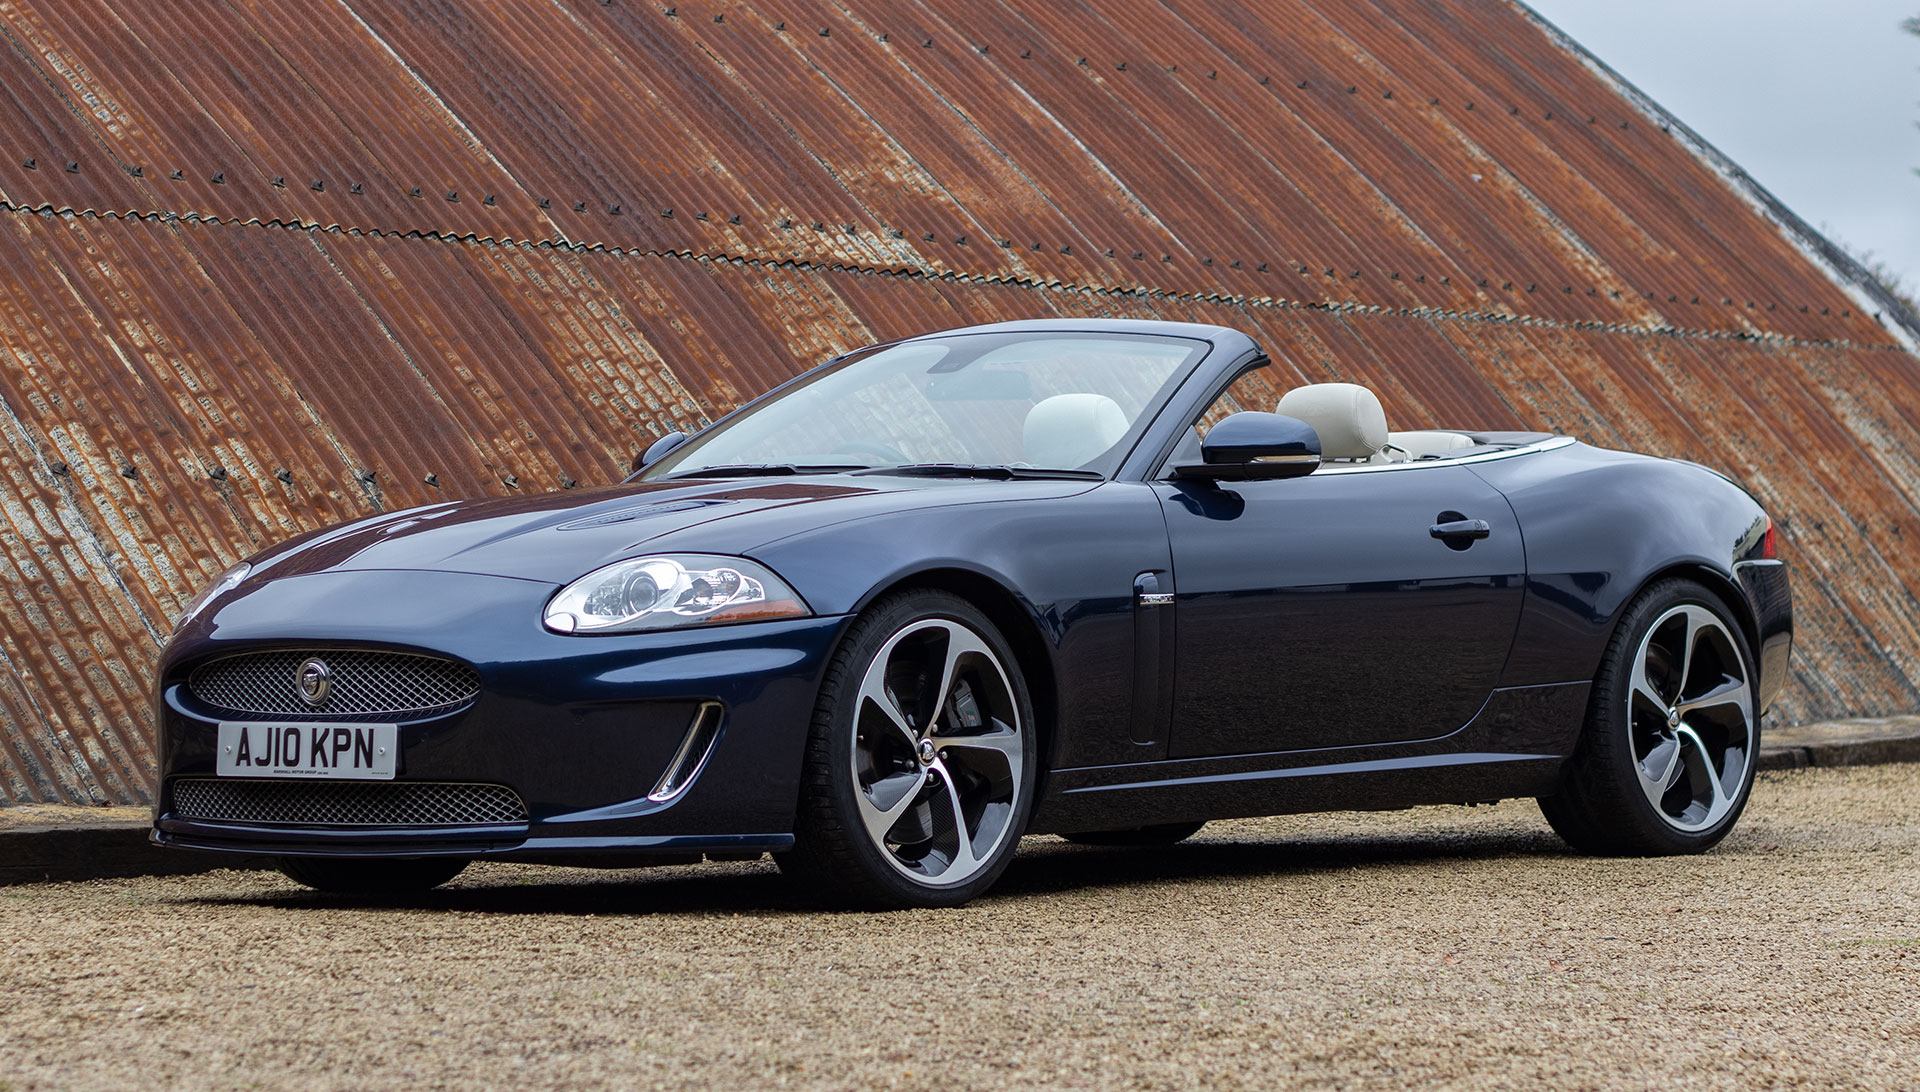 SOLD - 2010 Jaguar XKR 5.0 Supercharged Convertible - For Sale at The  Classic Motor Hub